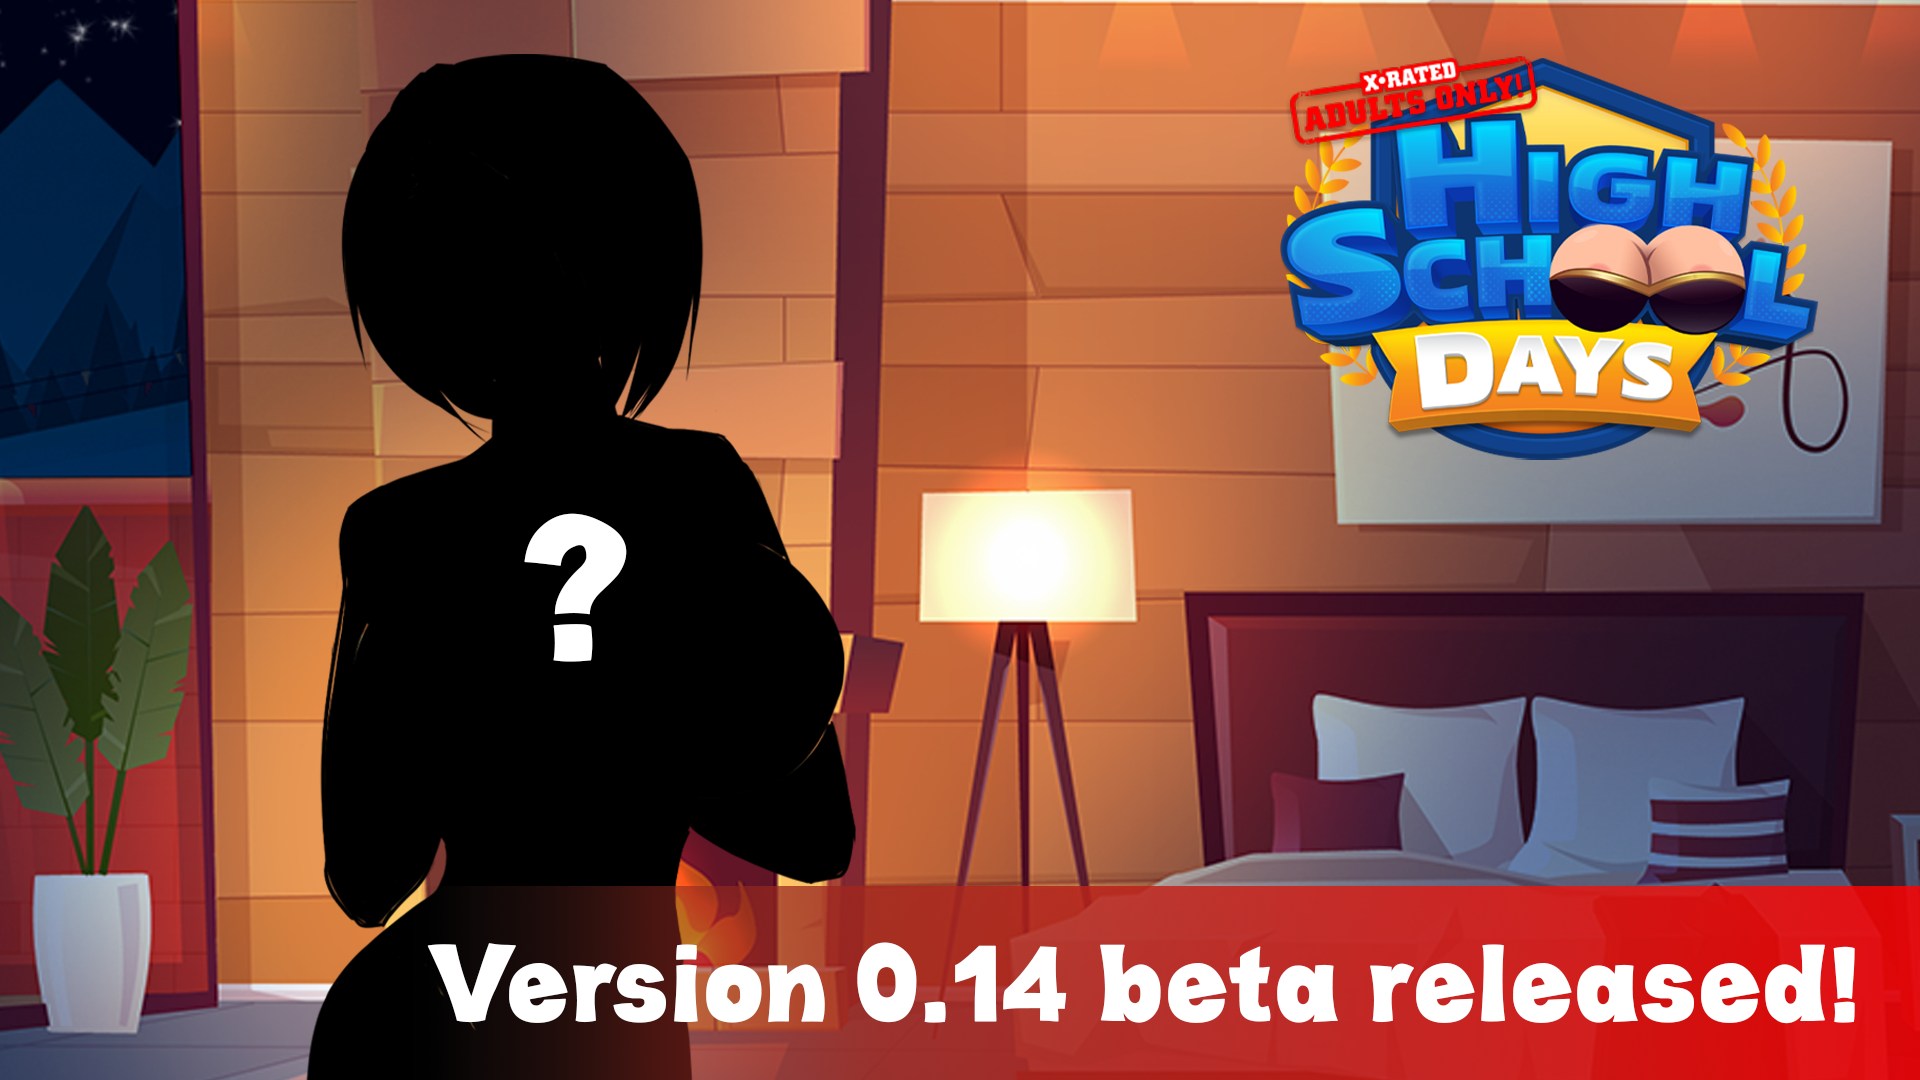 Version 0.14 beta is out!